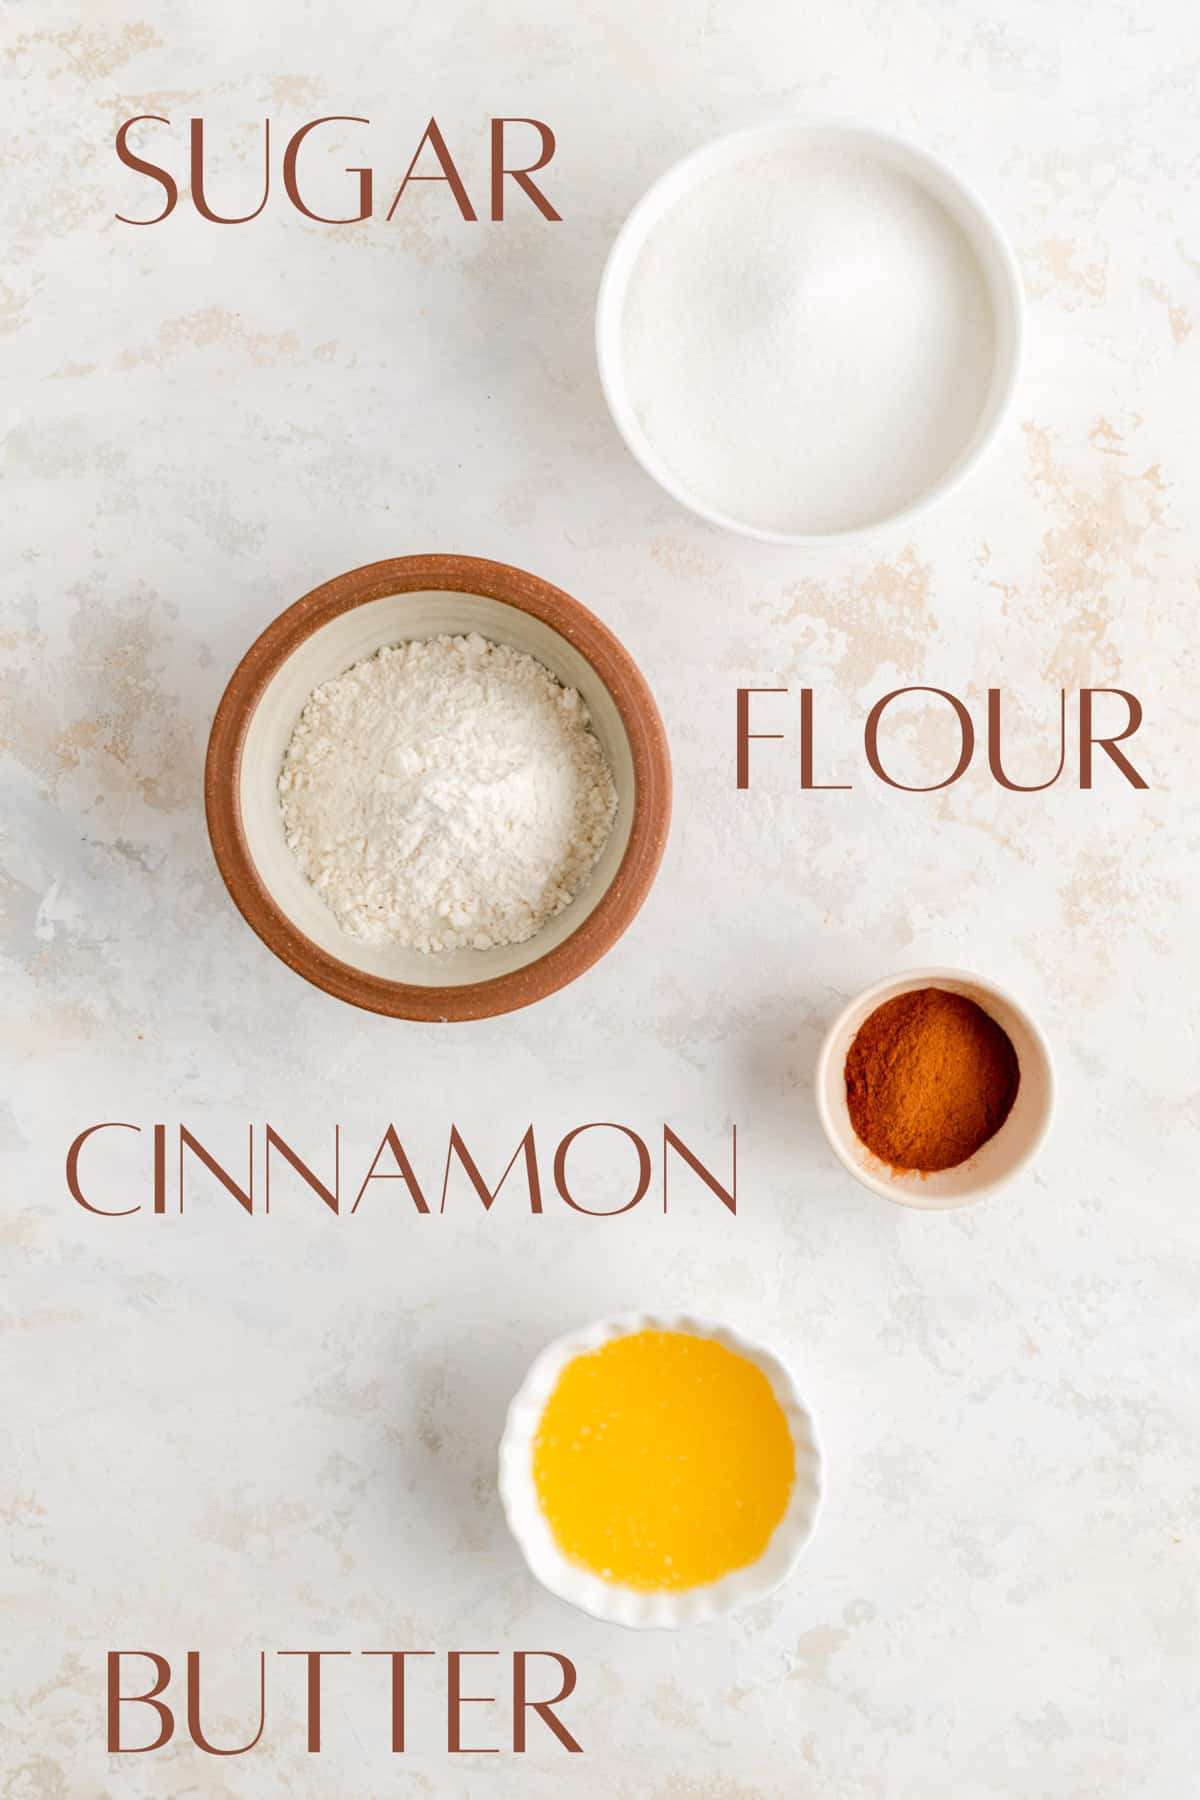 Labeled sugar flour cinnamon and butter in individual bowls on white plaster background.